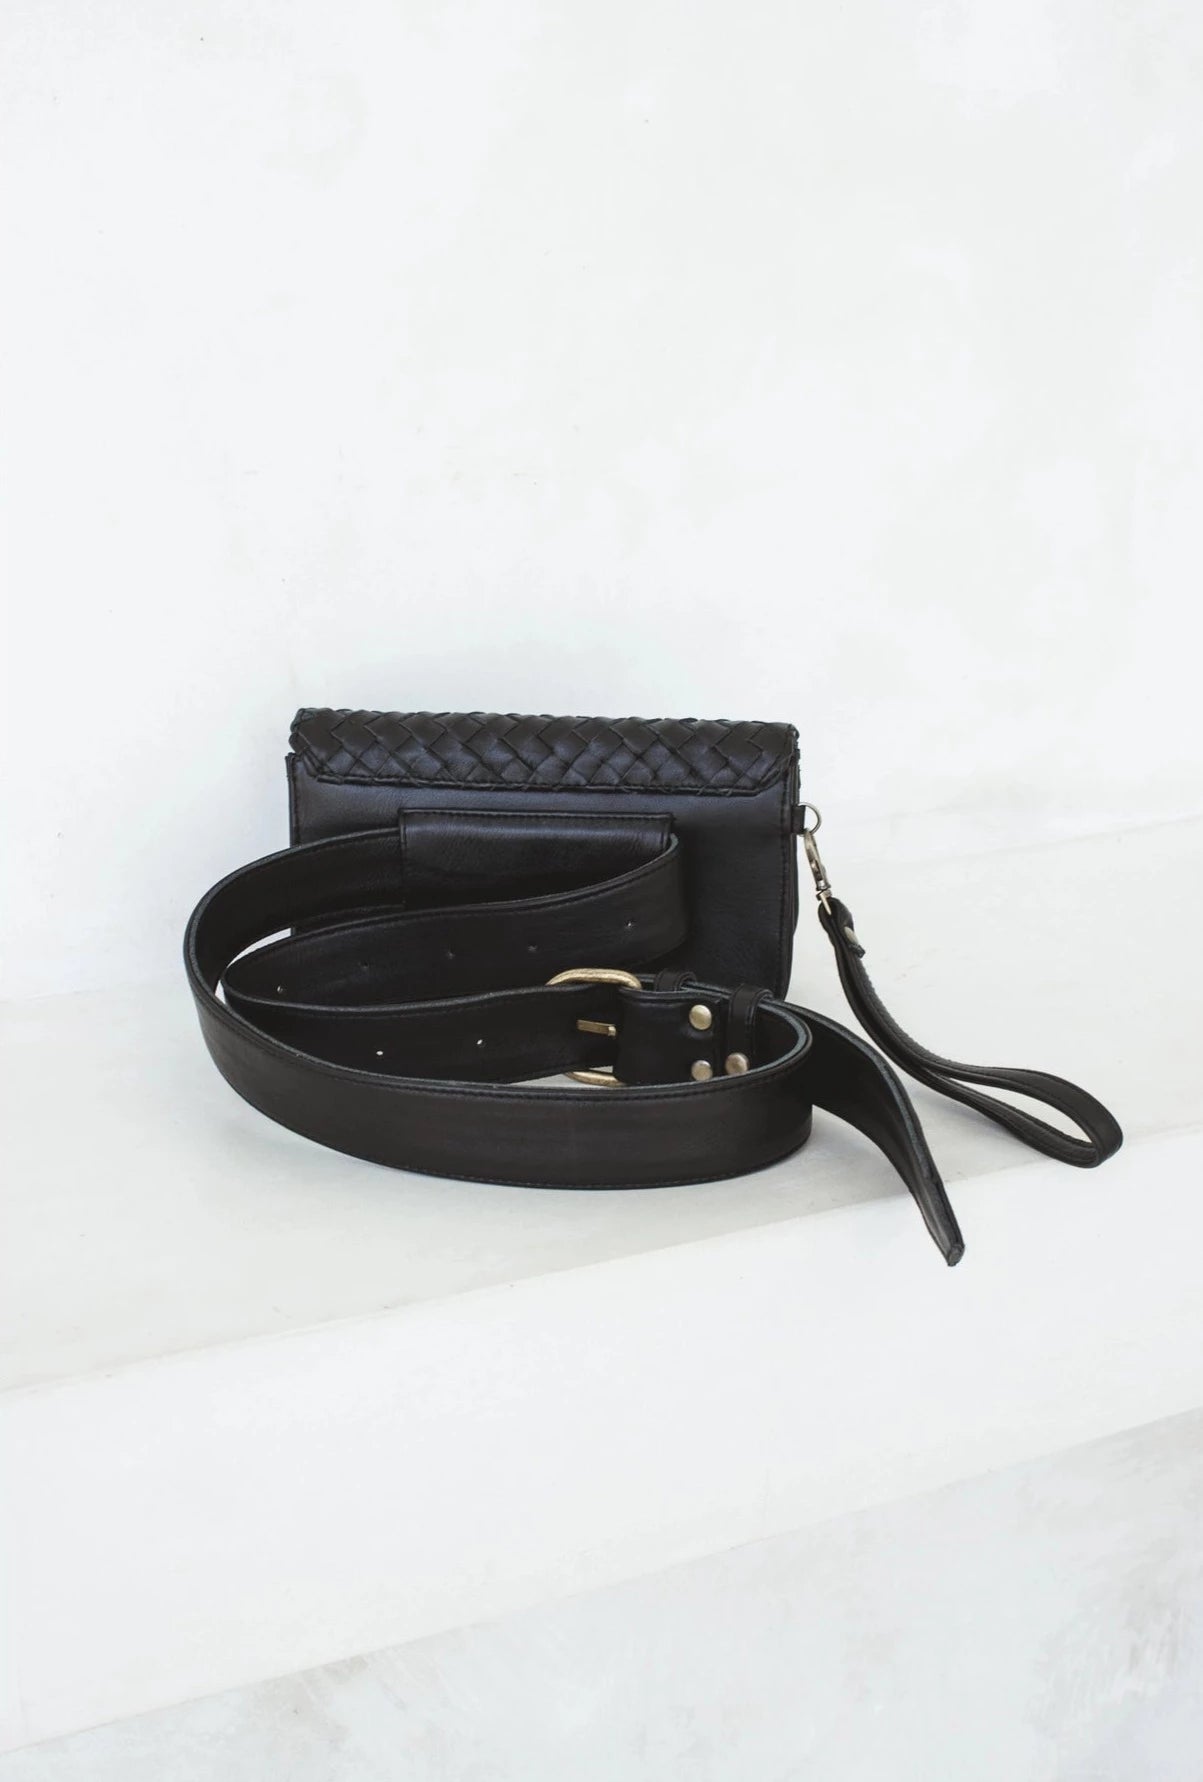 MANDRN | The Carry - Black Woven Leather Strap